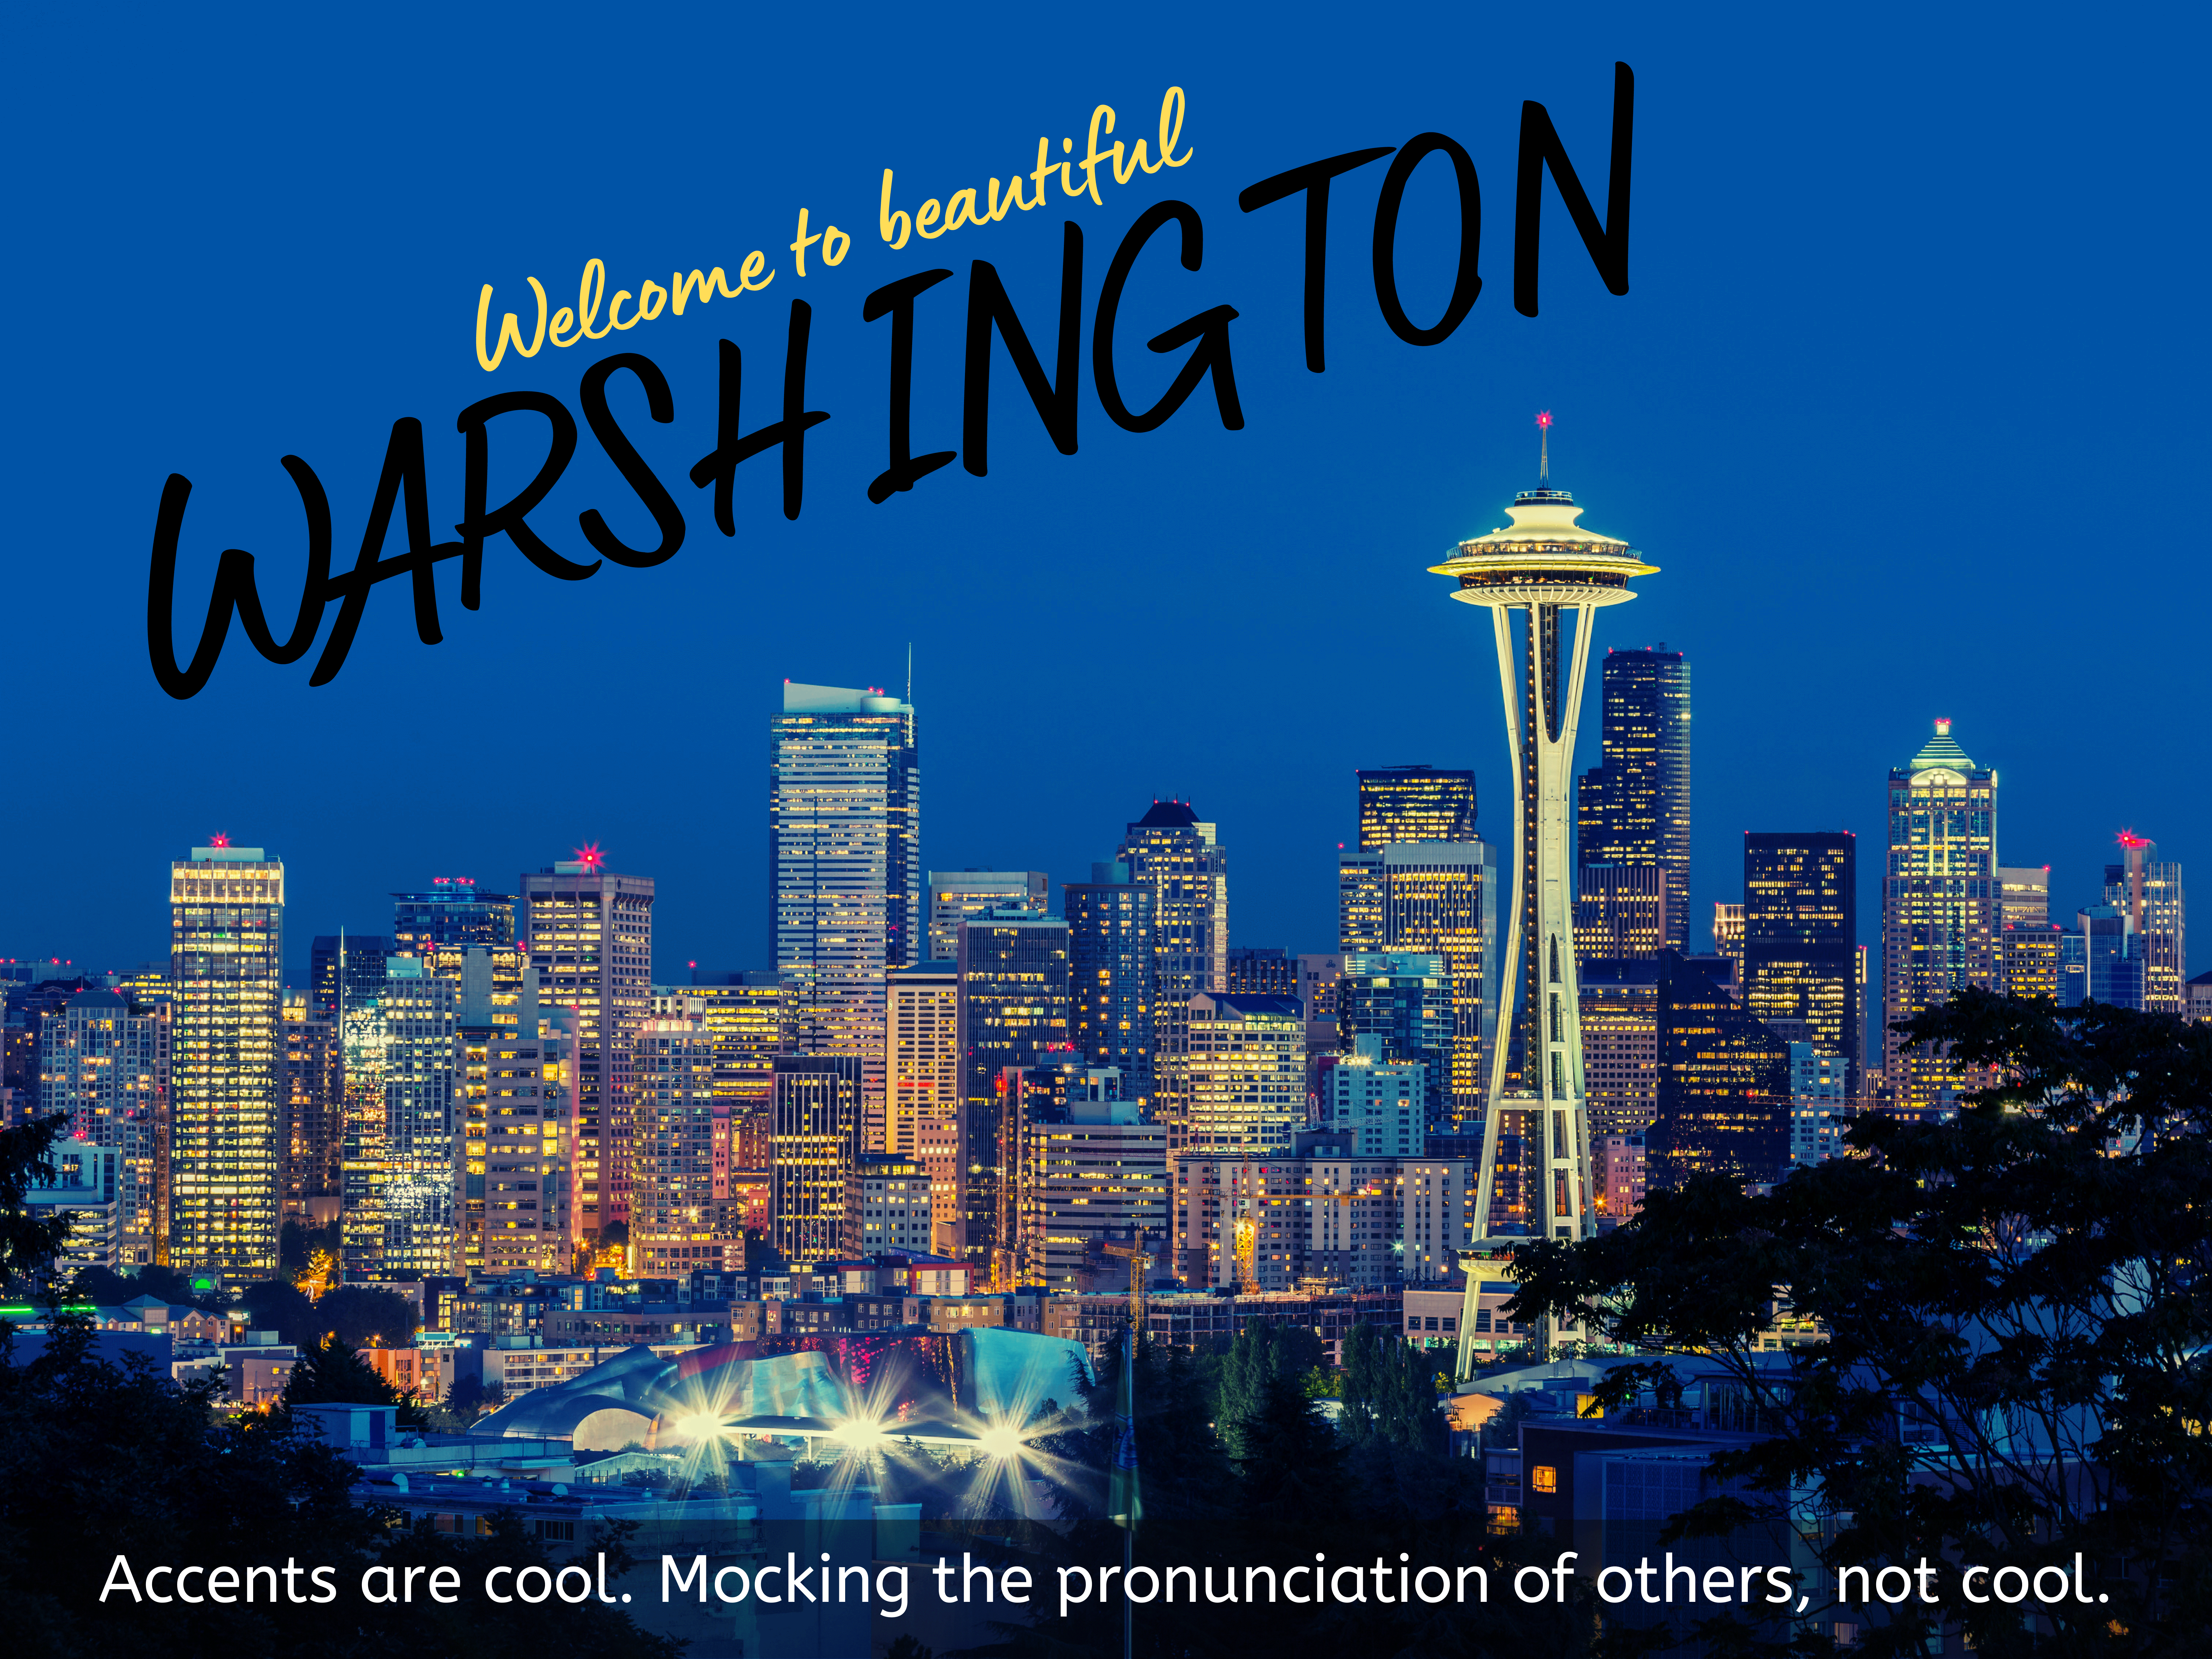 Linguistics Poster. Welcome to beautiful Washington (Warshington). See webpage for full description.